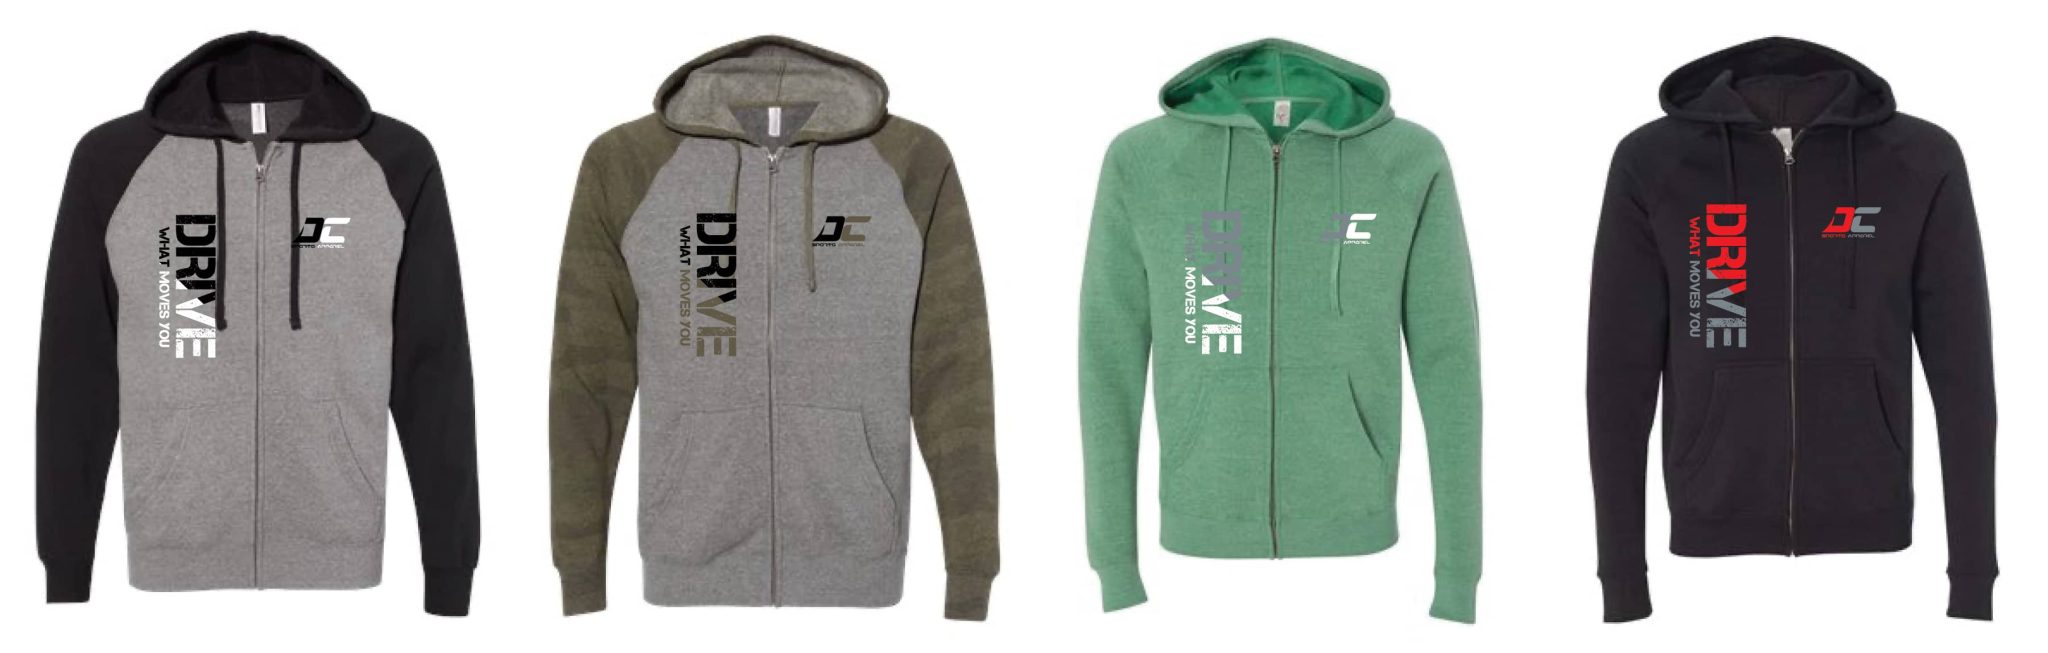 custom hoodies for businesses and sports teams